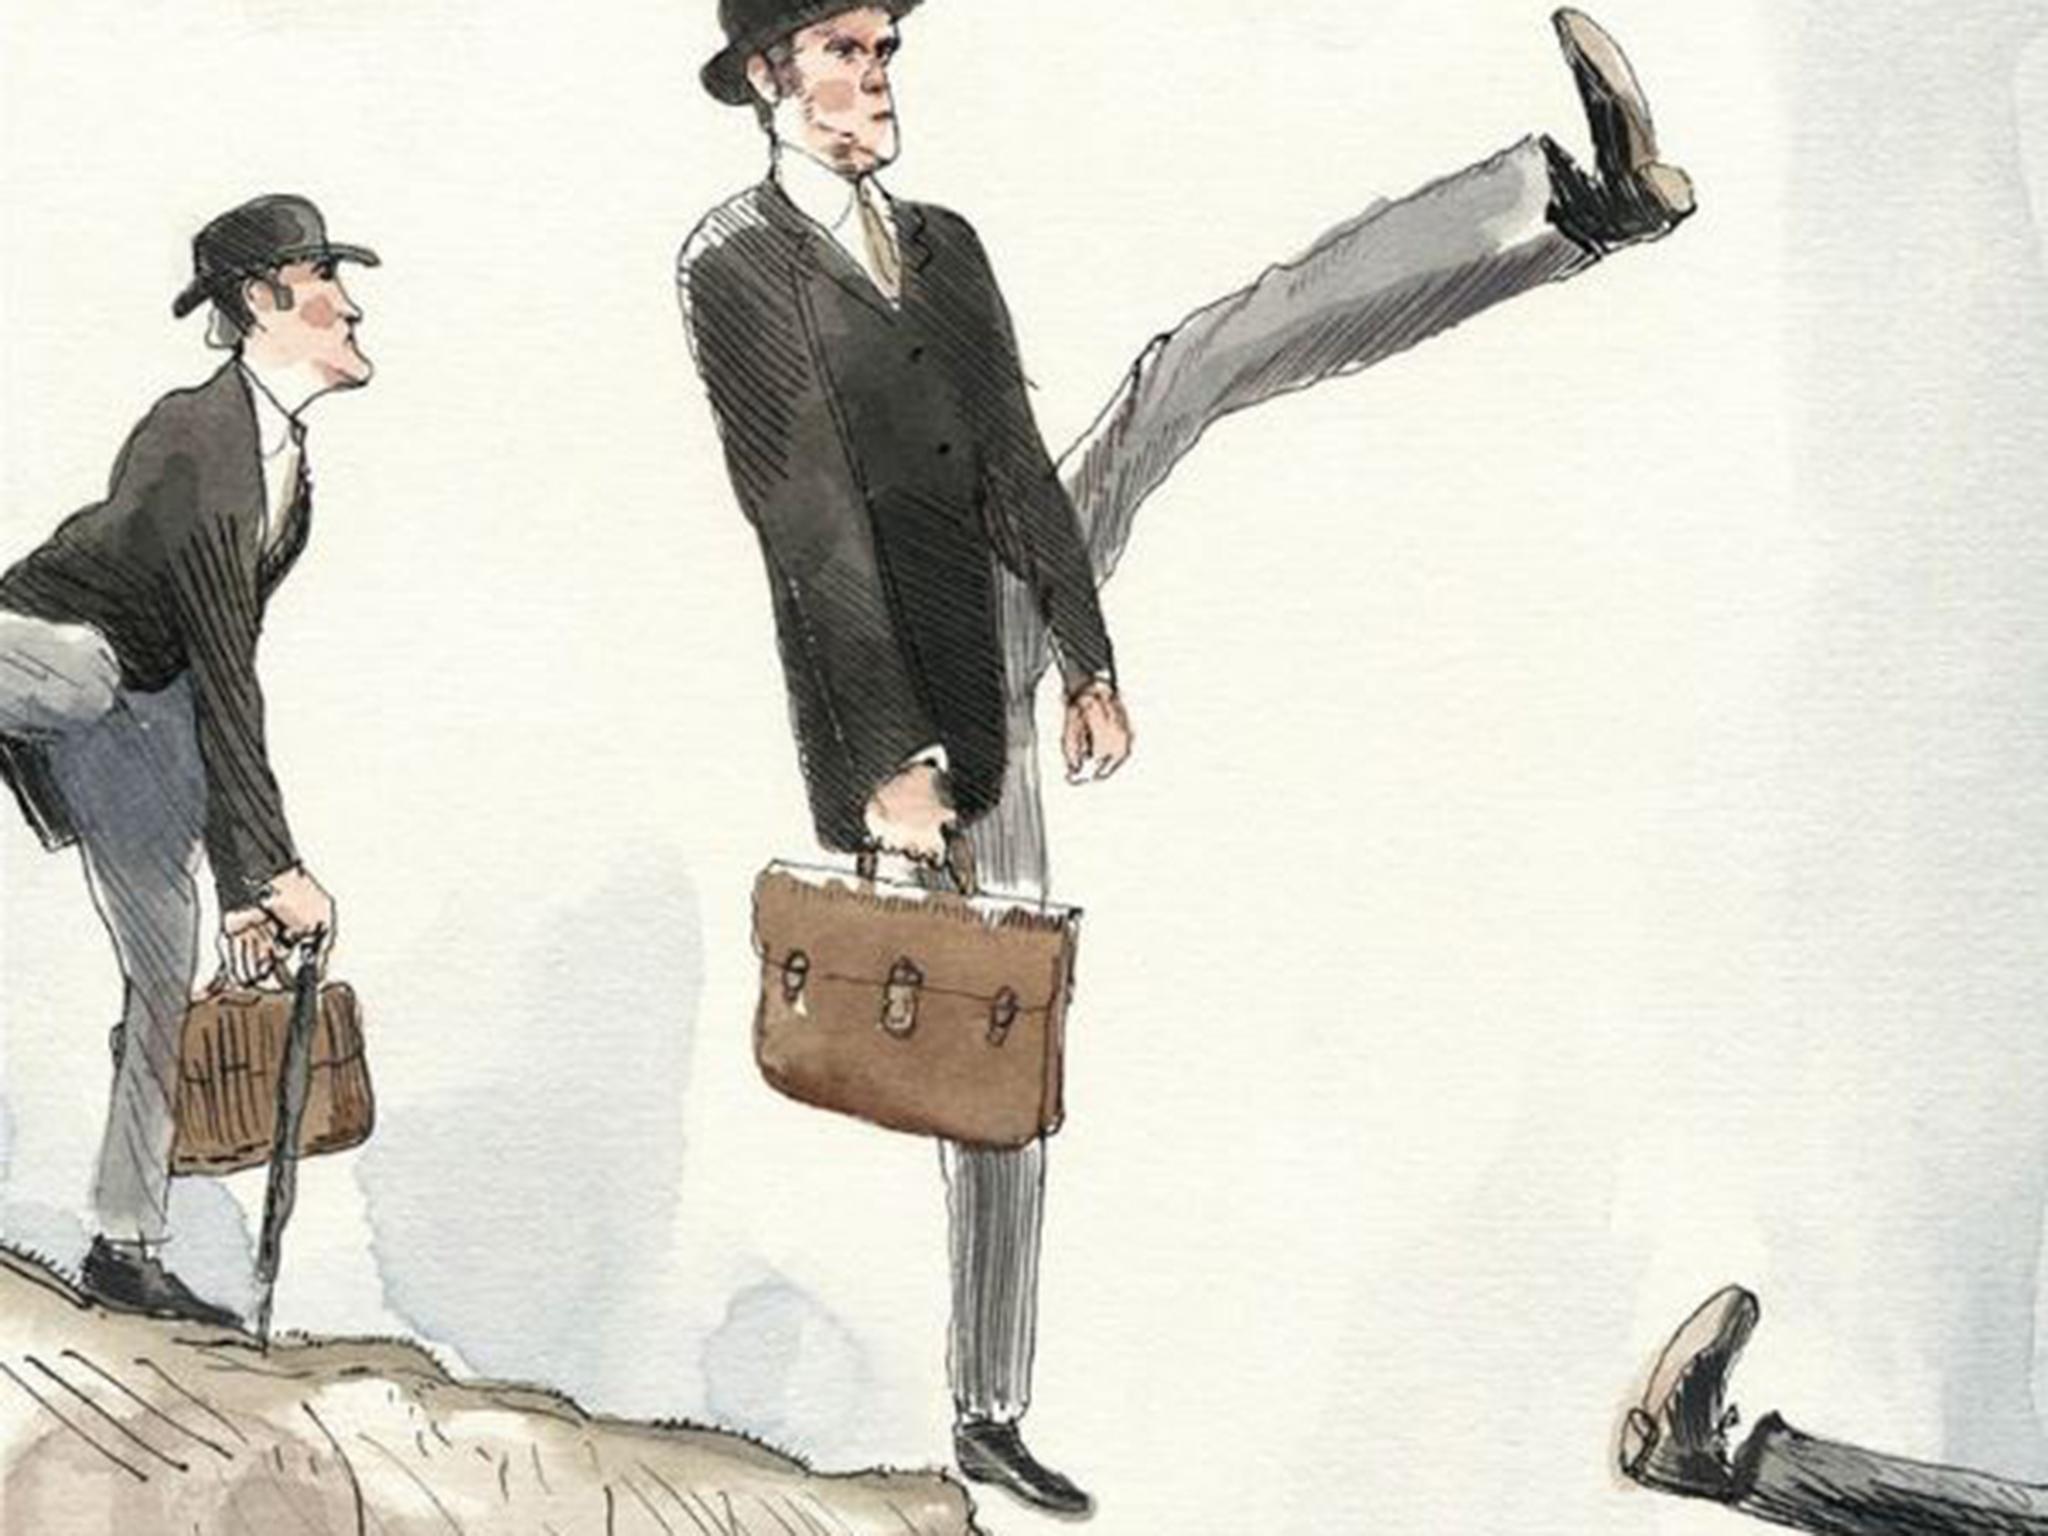 The New Yorker had us silly walking ourselves off a cliff